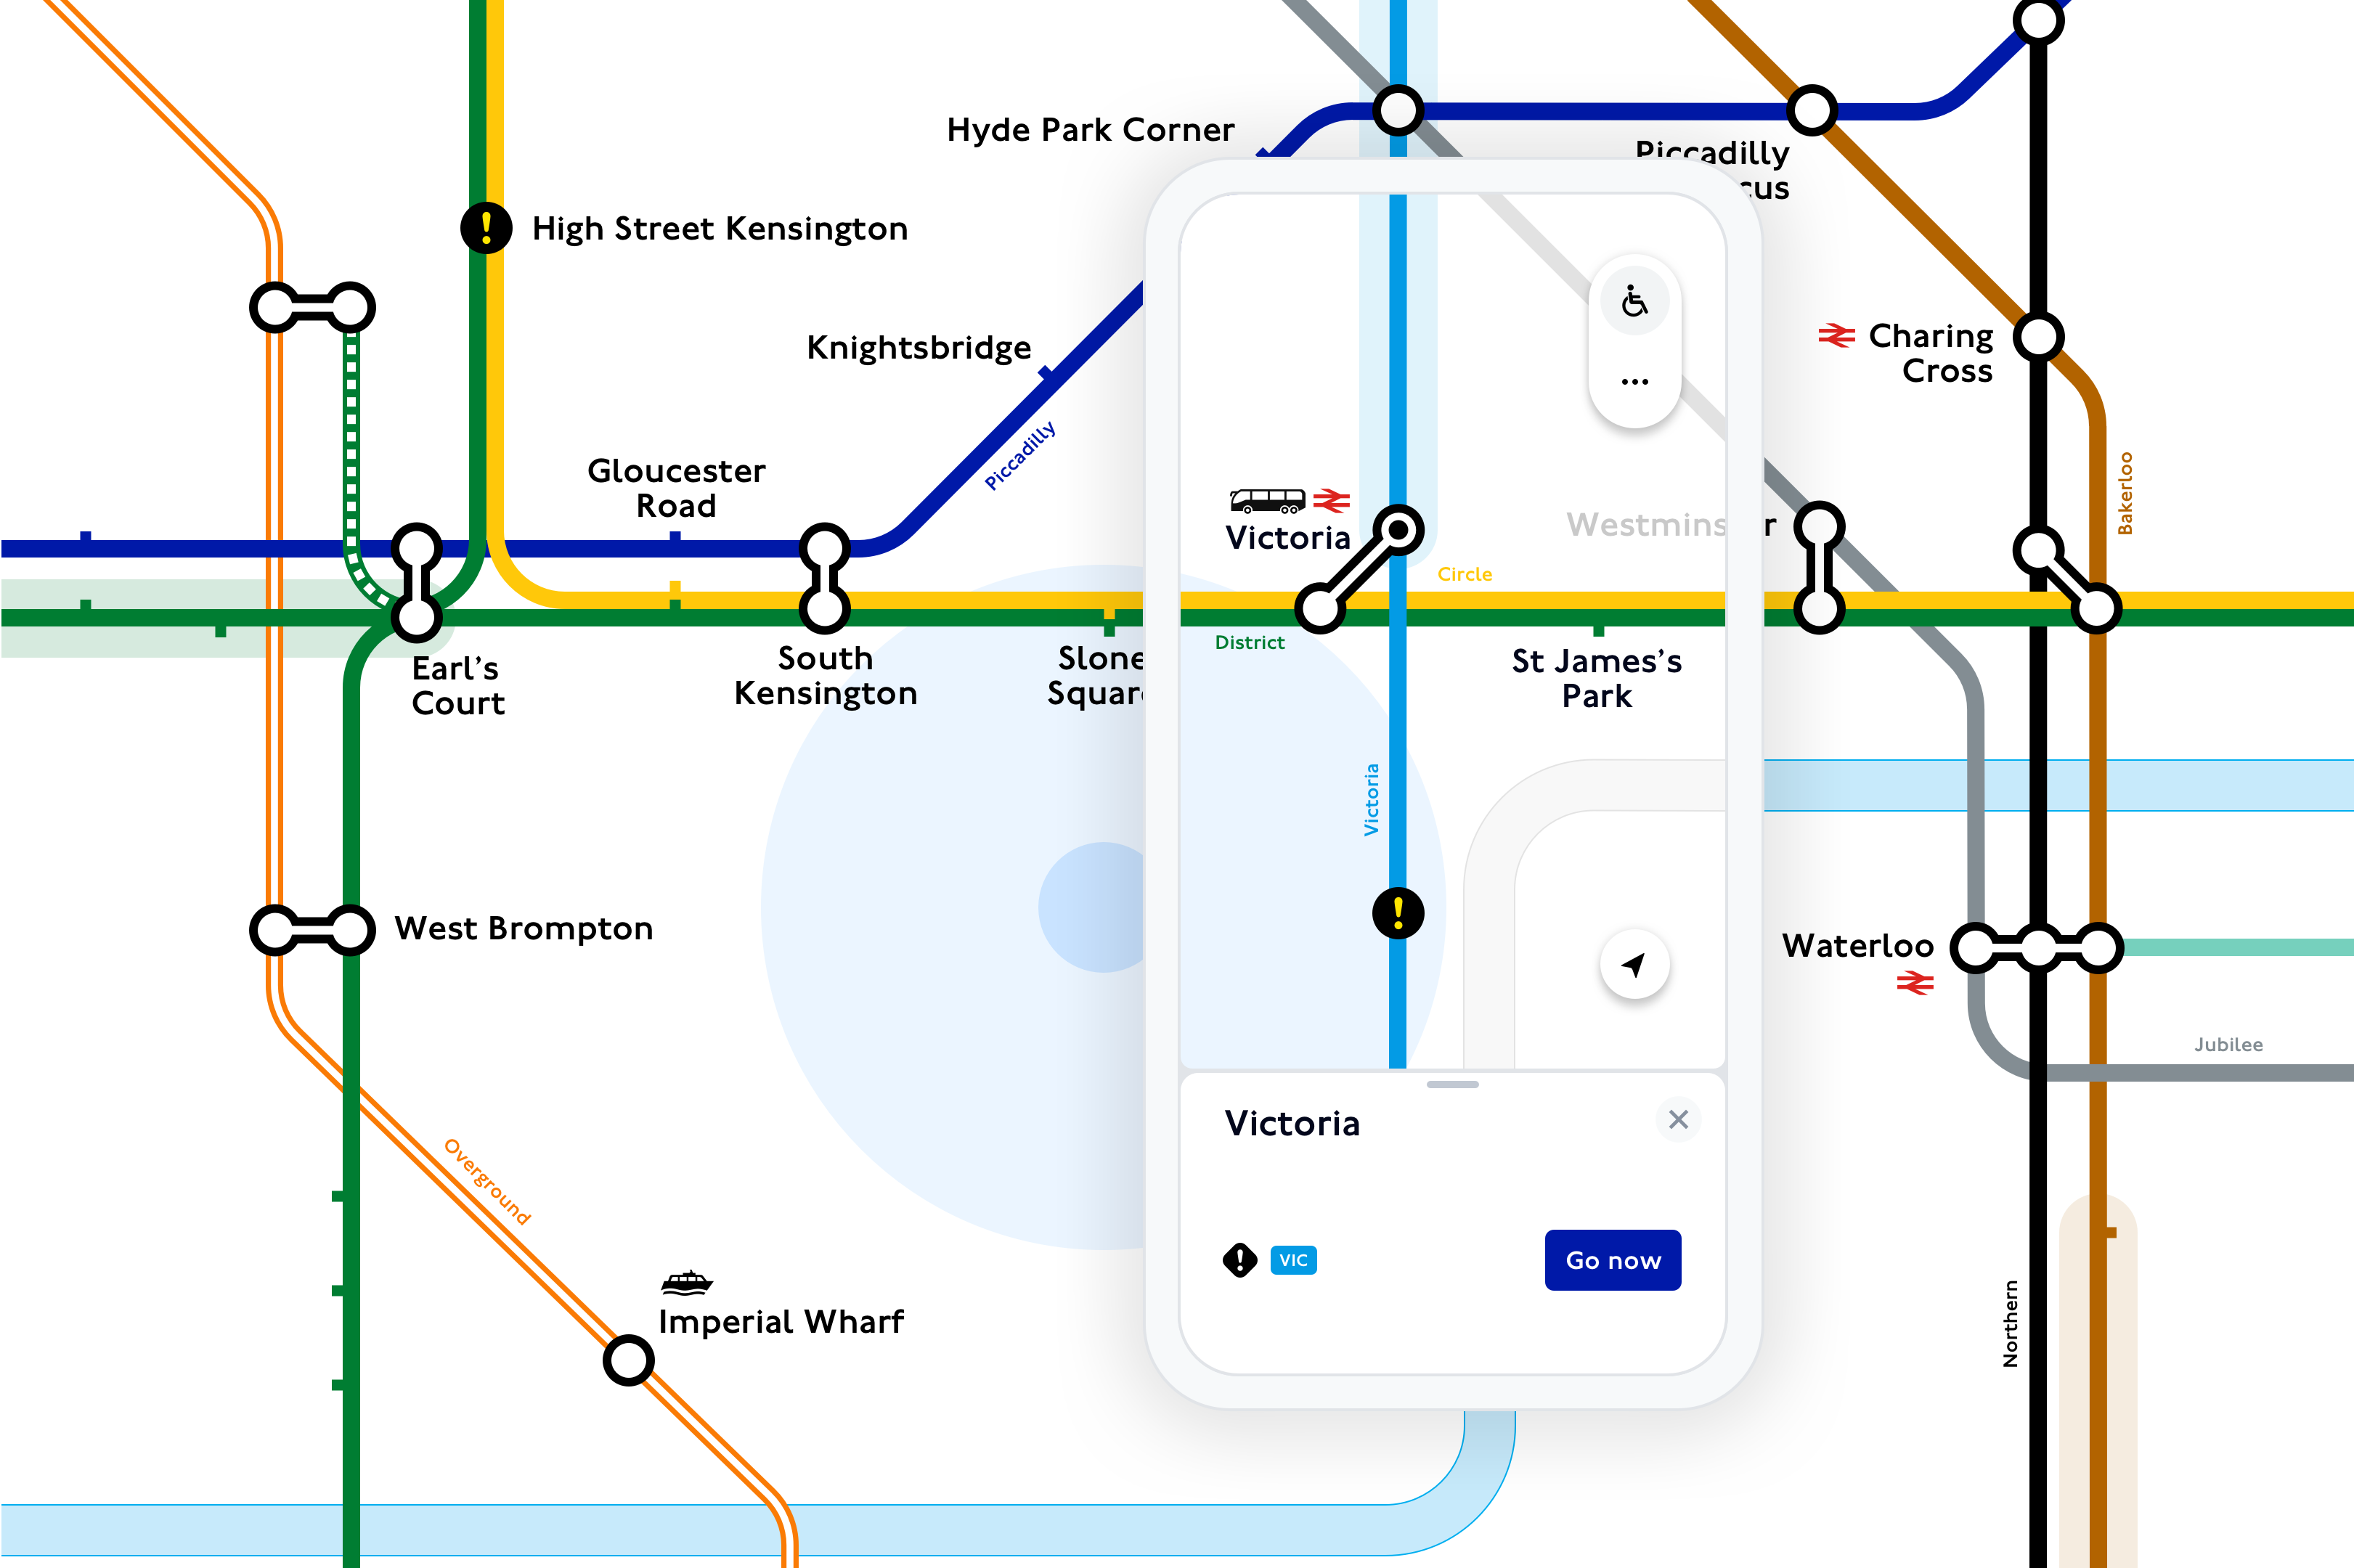 An image of the live, digital Tube map in TfL Go